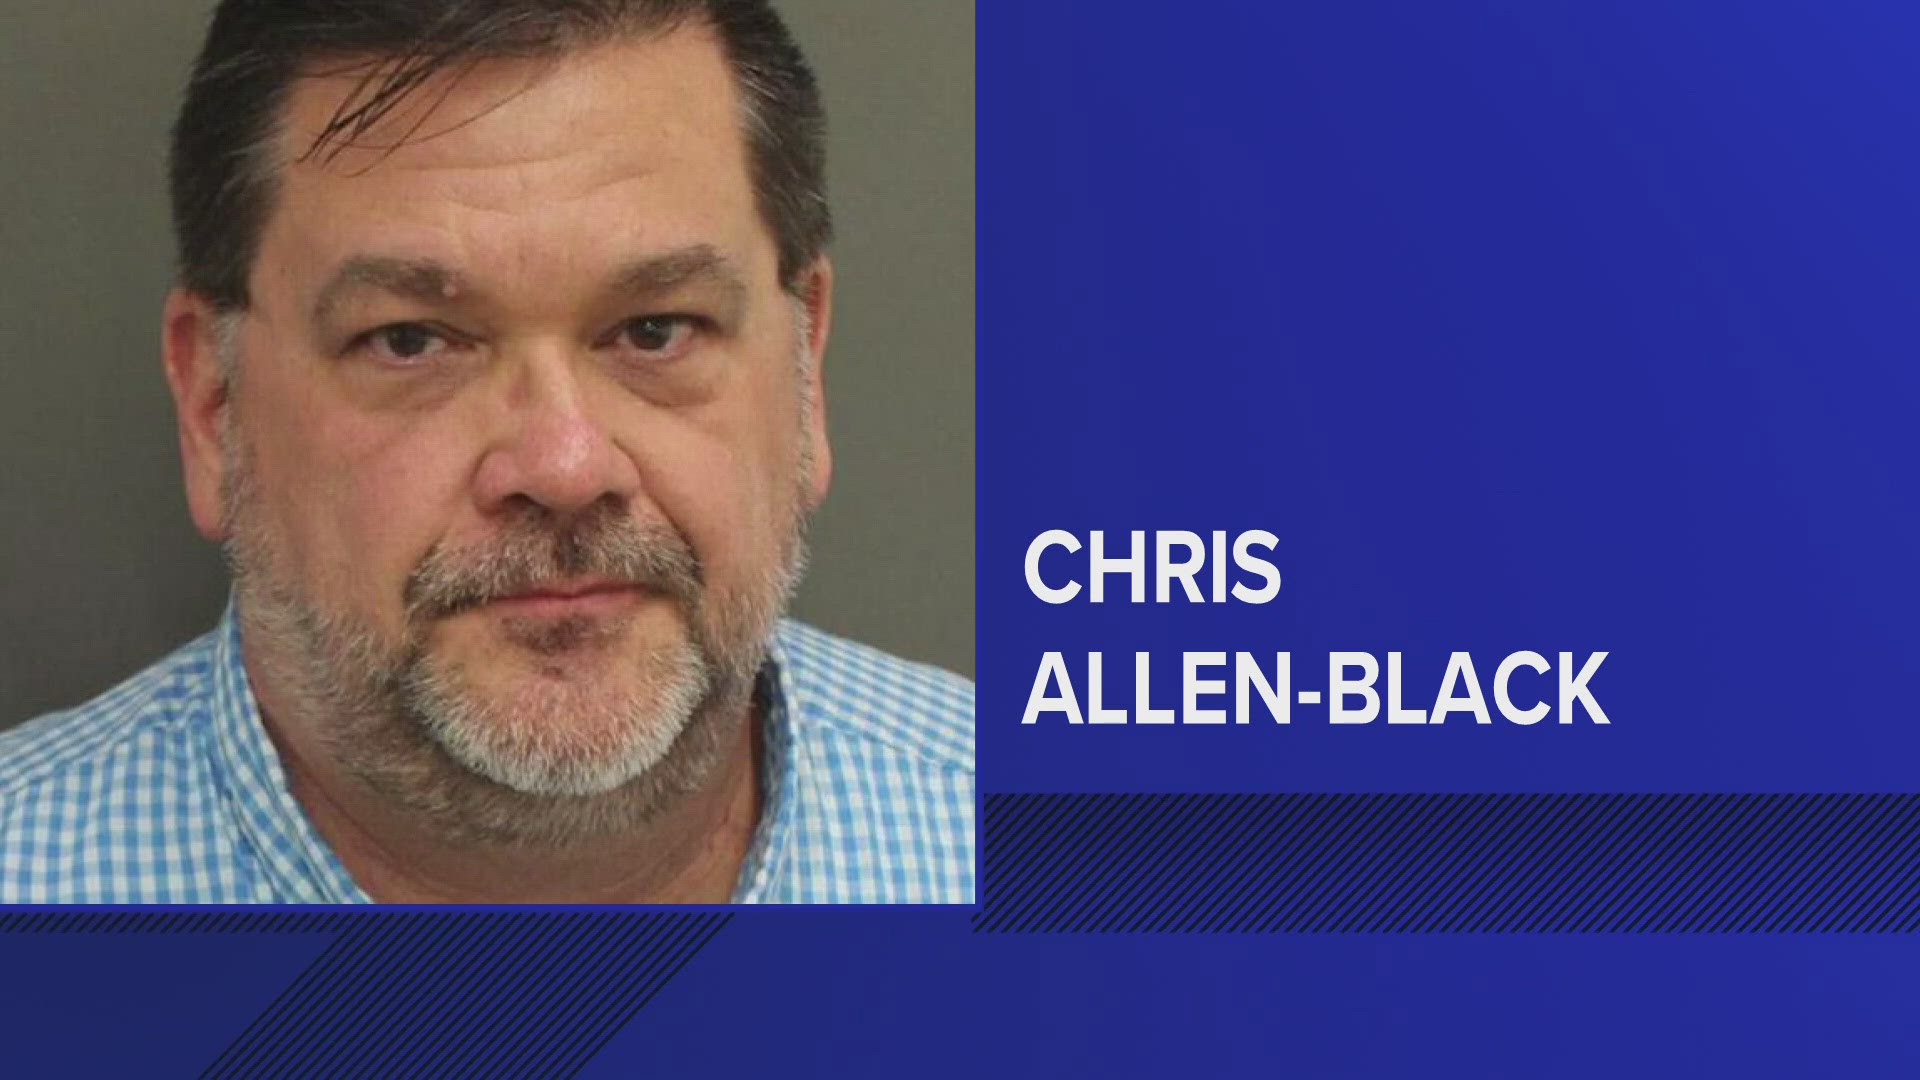 Chris Allen Black was allowed to keep working for more than a month after he was arrested for exposing himself at a Disney resort.